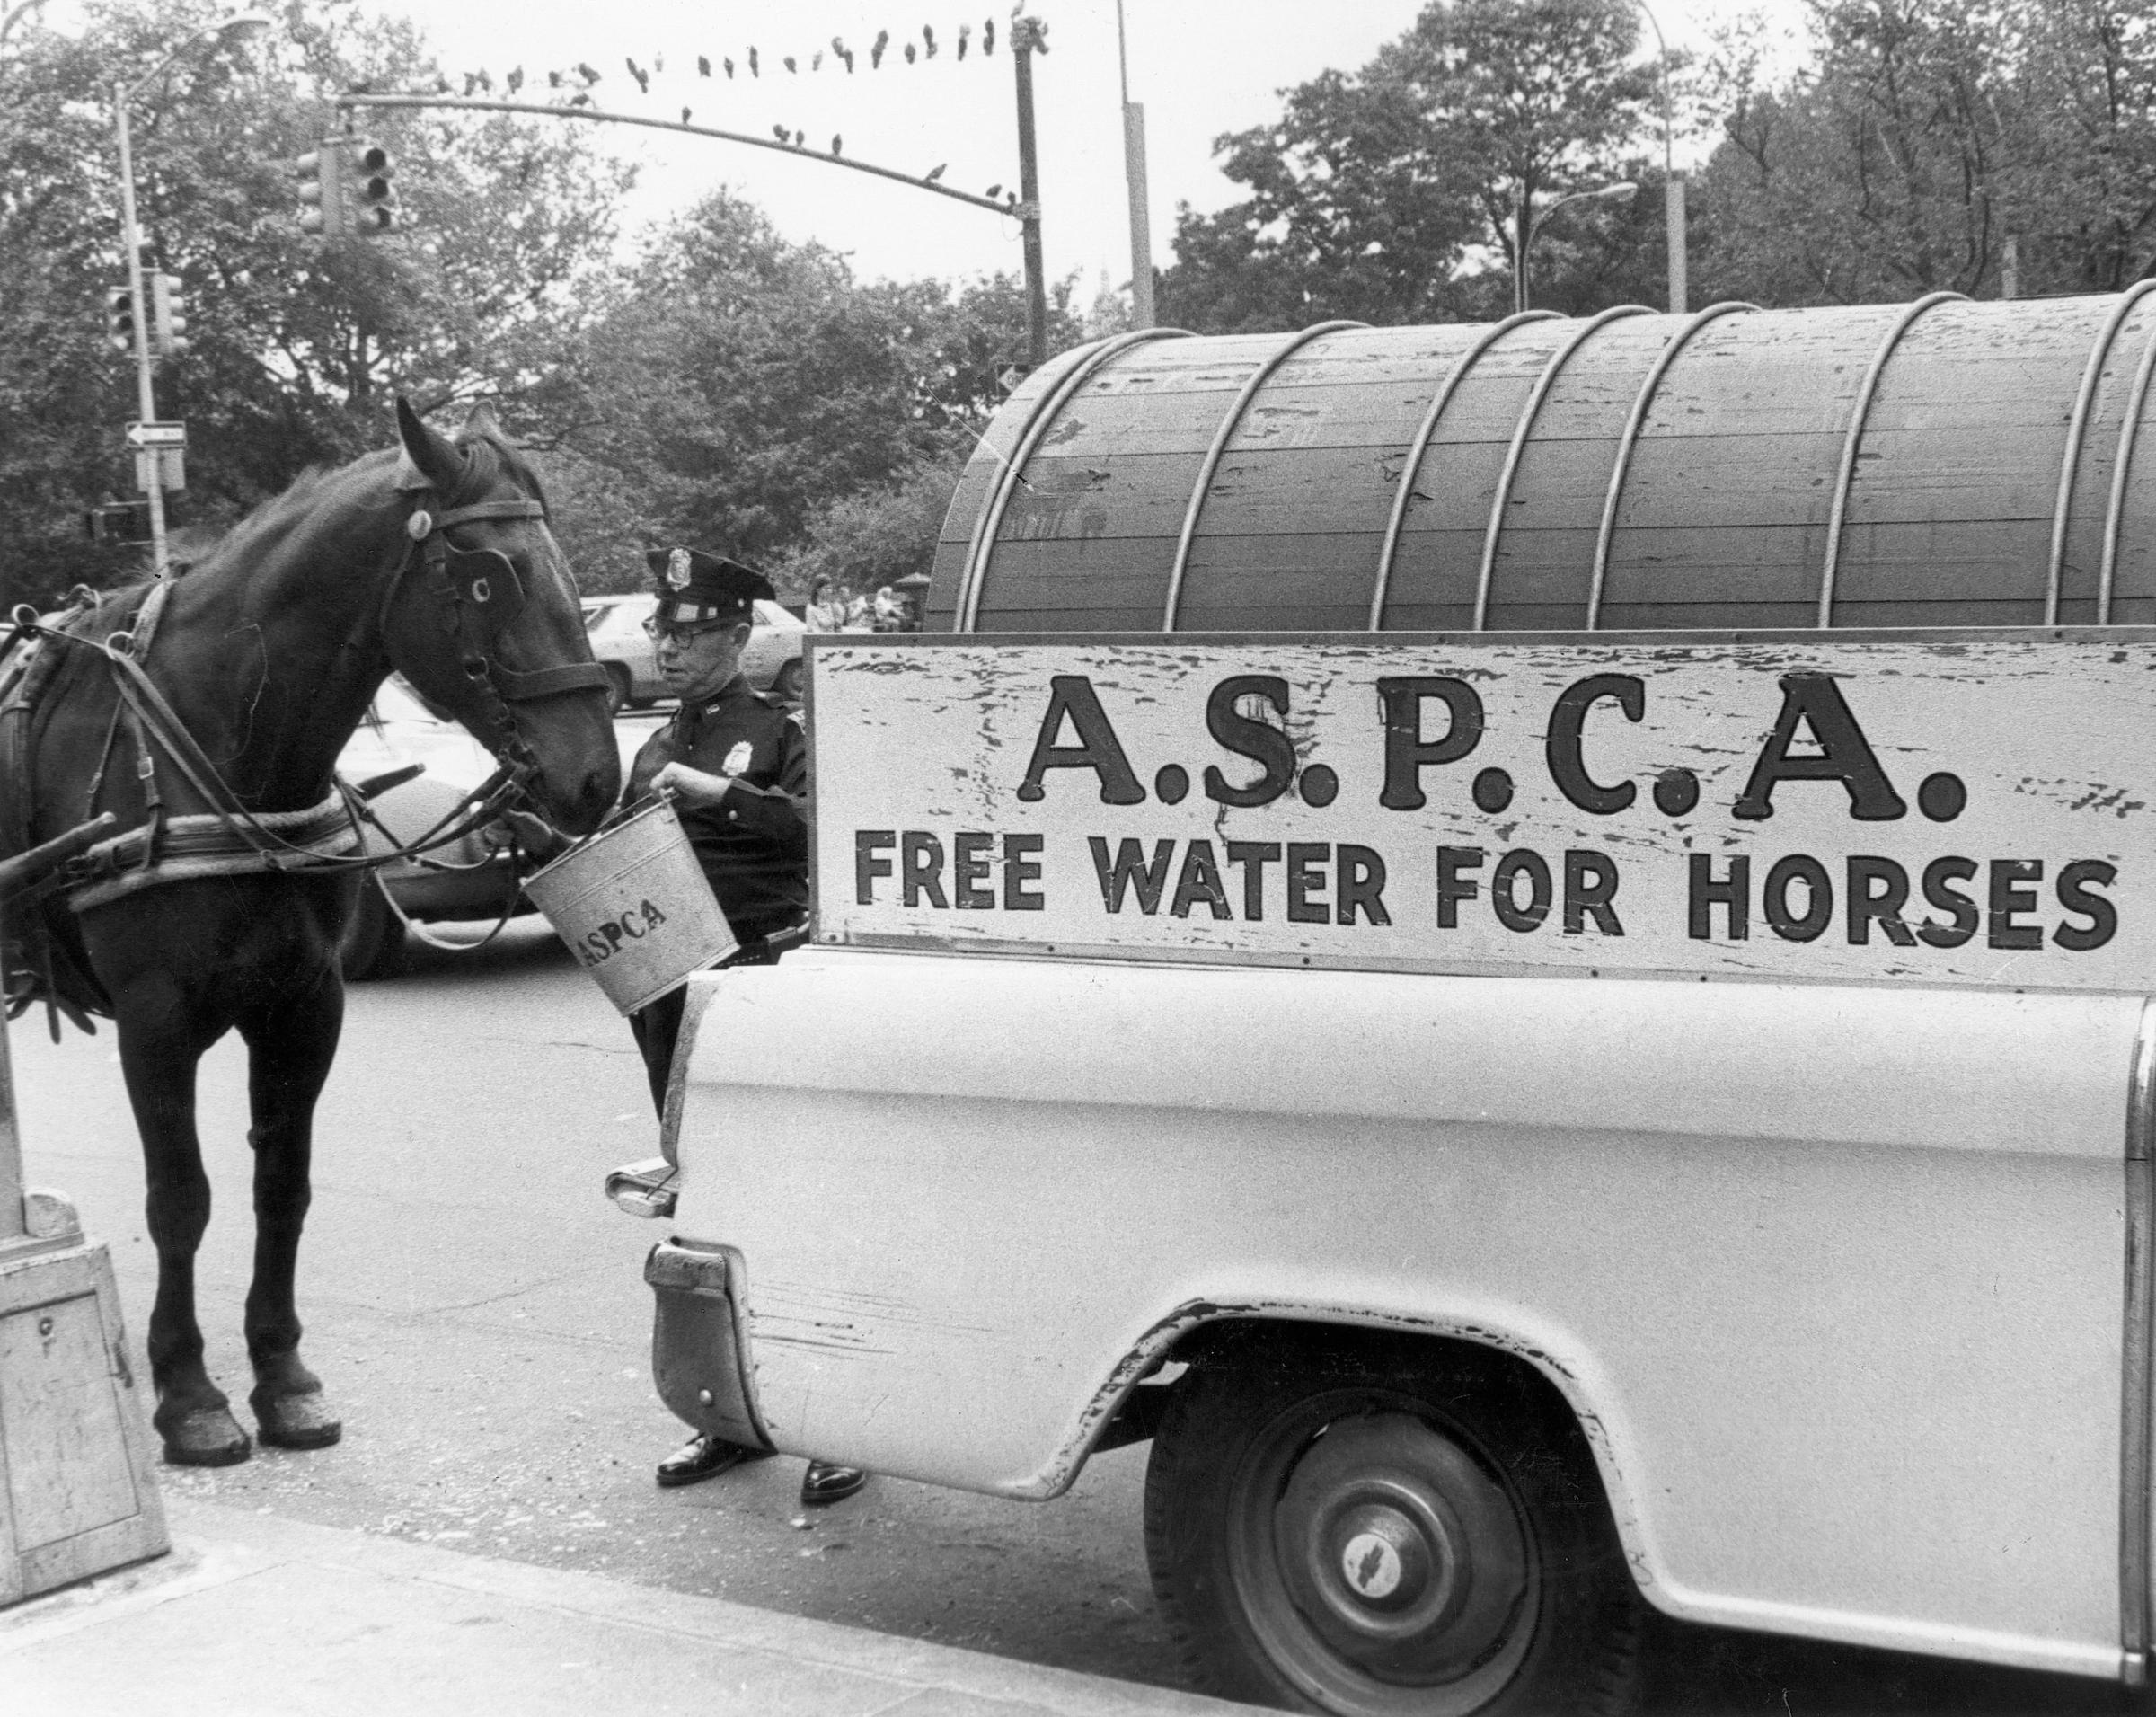 ASPCA horse watering service vehicle and agent provide a drink to a thirsty horse in NYC, 1960s